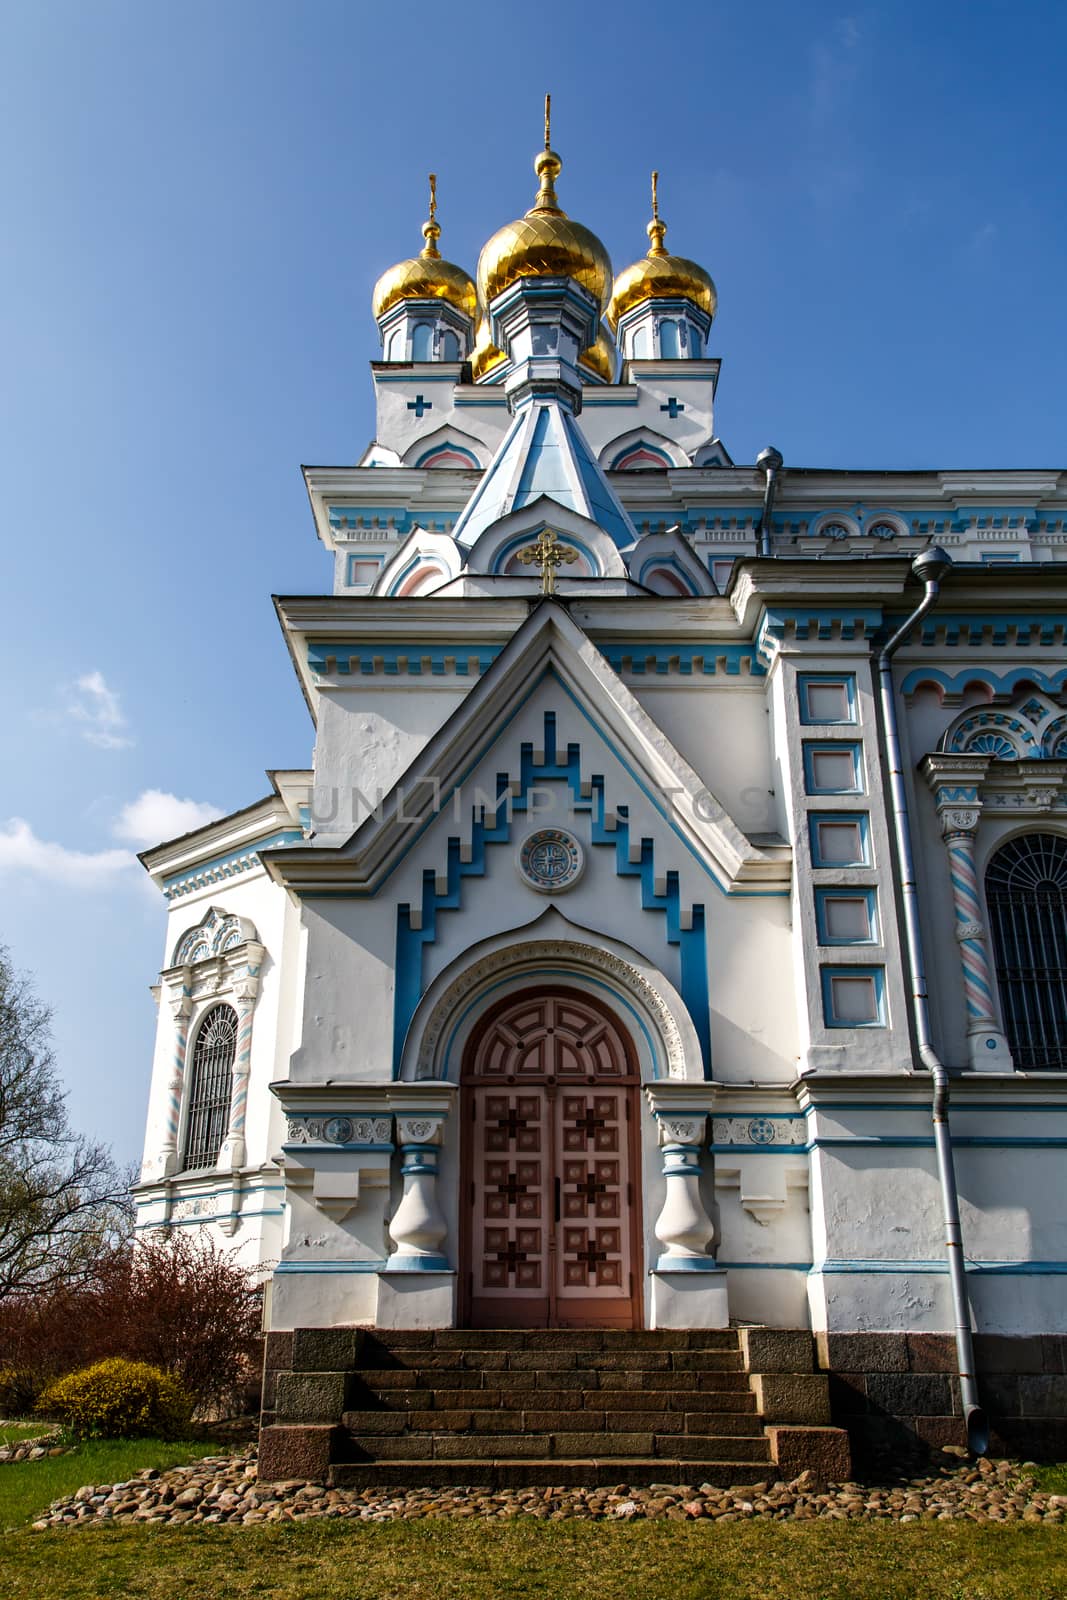 Front view of Orthodox Ss Boris and Gleb Cathedral in Dougavpils, Latvia, on blue cloudy sky background.